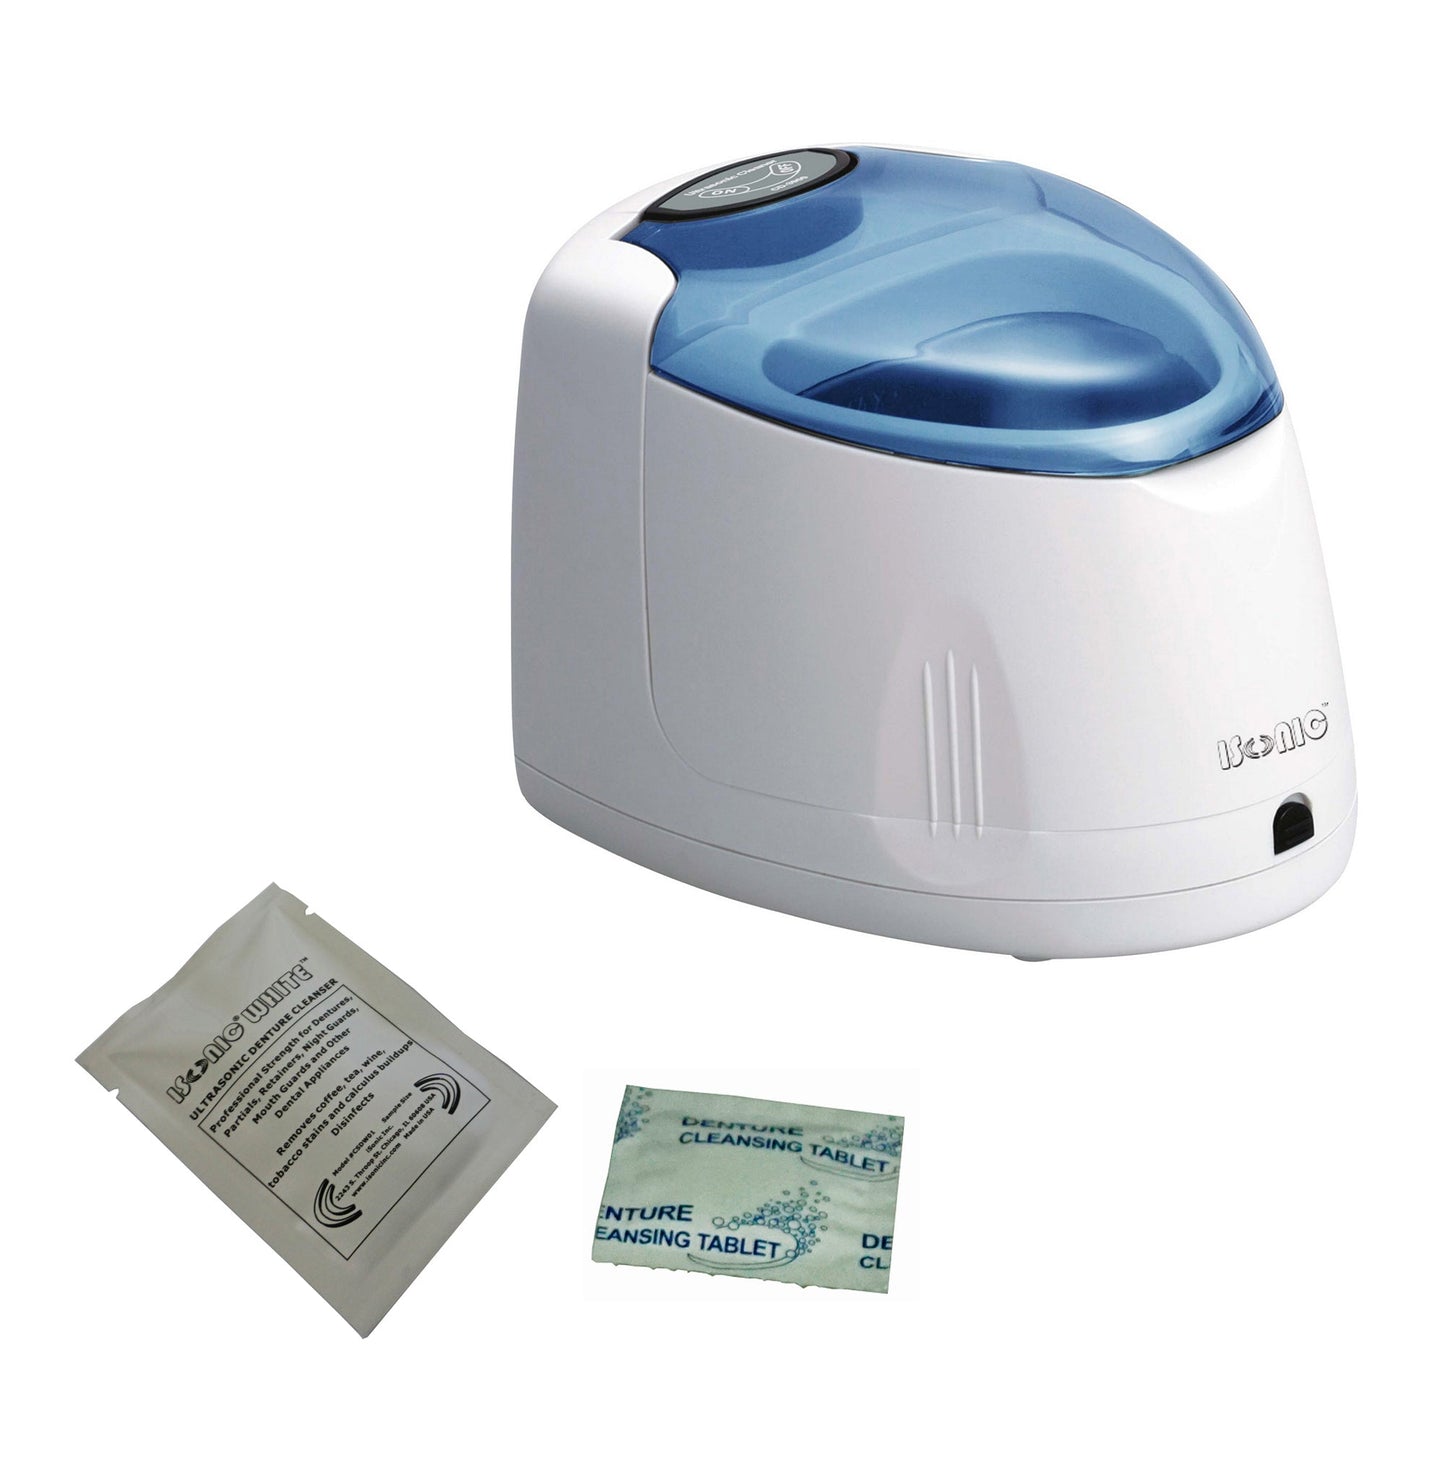 F3900 | iSonic® Ultrasonic Denture/Aligner/Retainer Cleaner, 110V 20W (tank is not removable, for portable unit, check DS180, DS180-B)